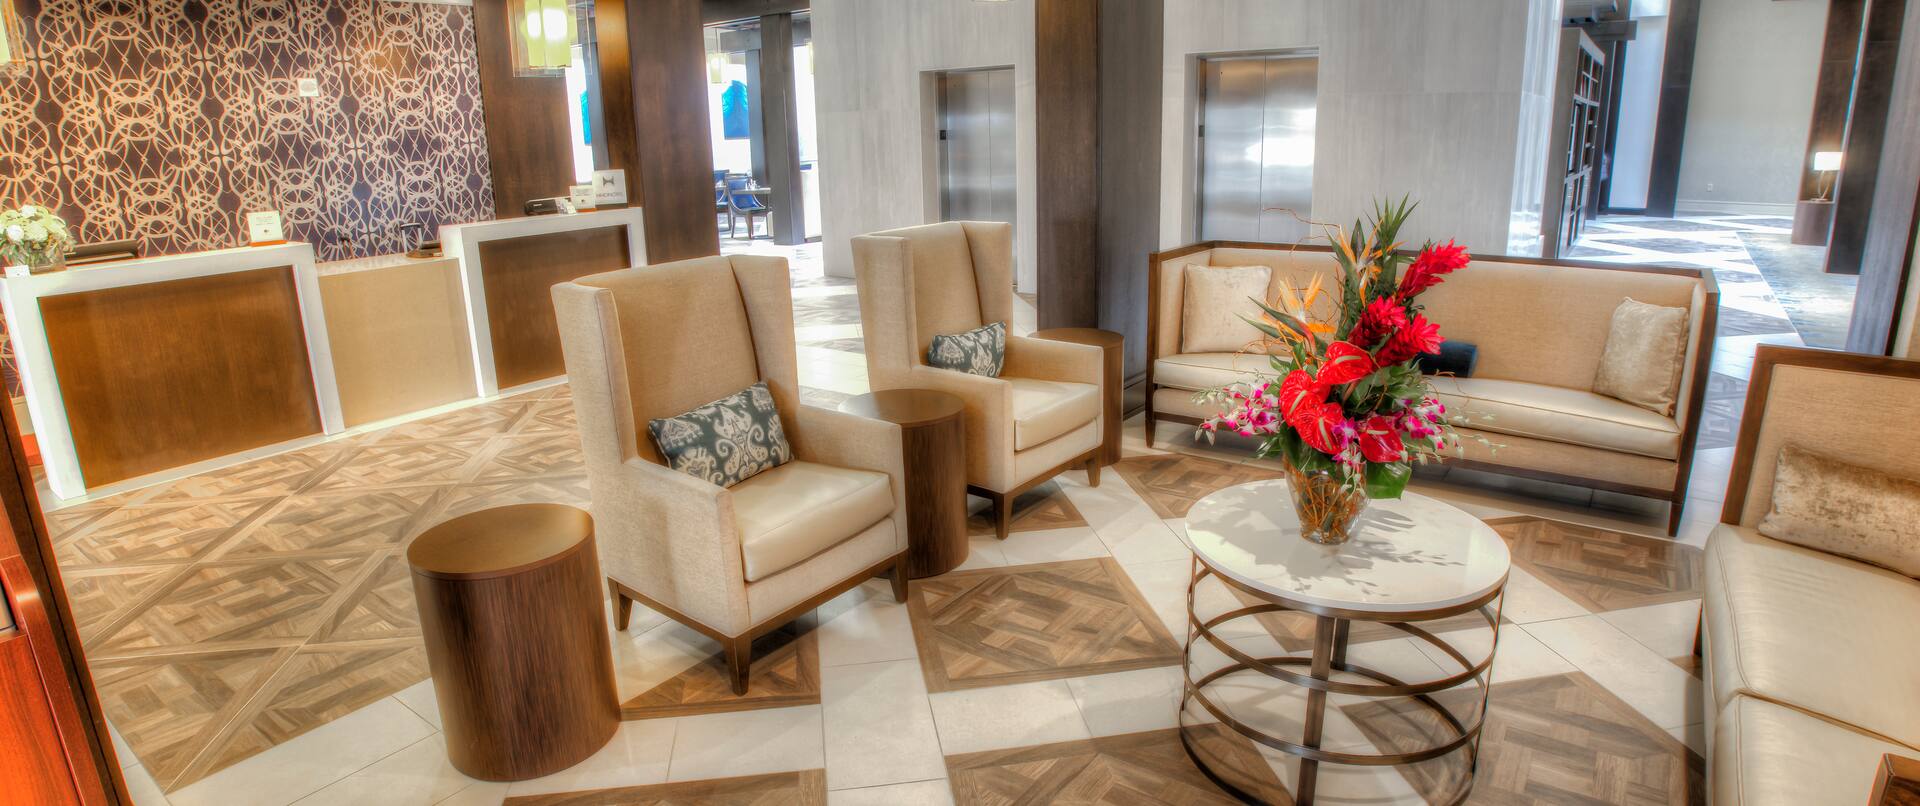 Overview of Brightly Lit Lounge Seating in Lobby, Front Desk, and Elevator Bay